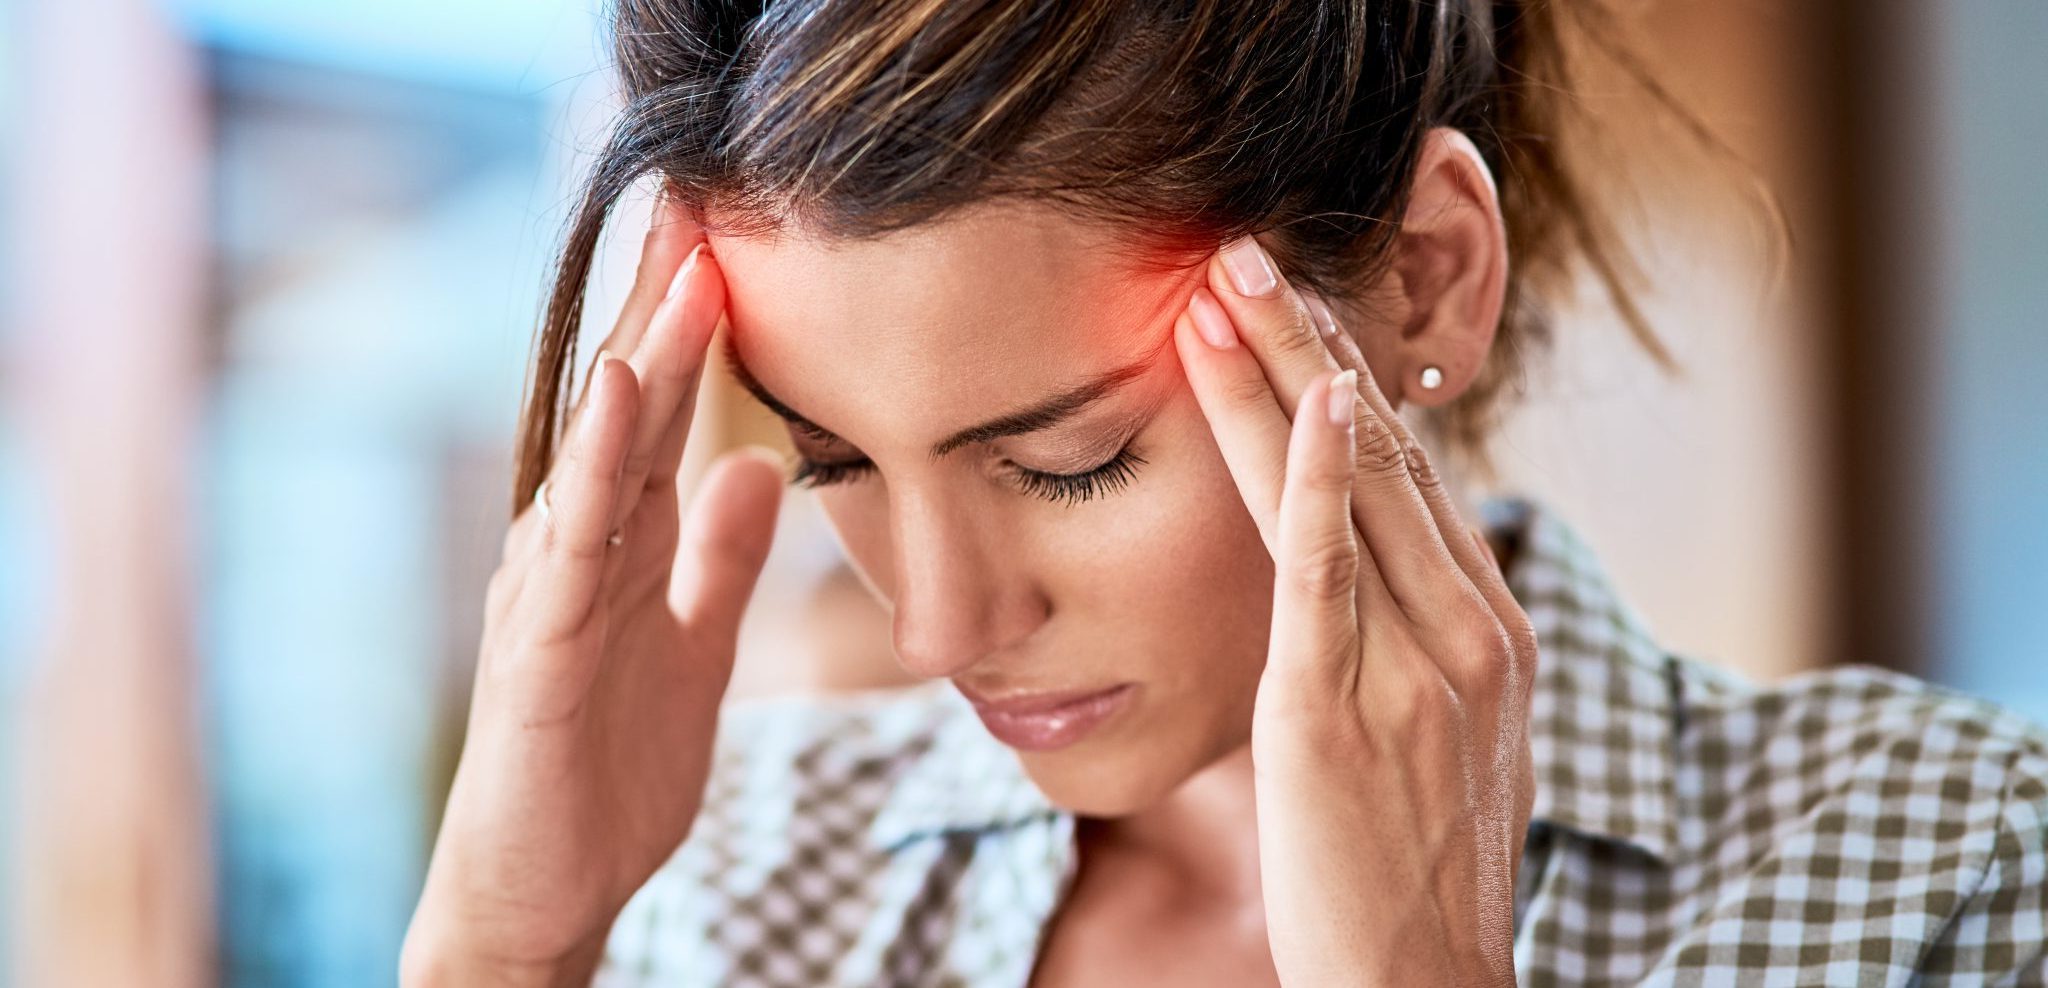 How to Get Rid of Your Headache with Self-Massage